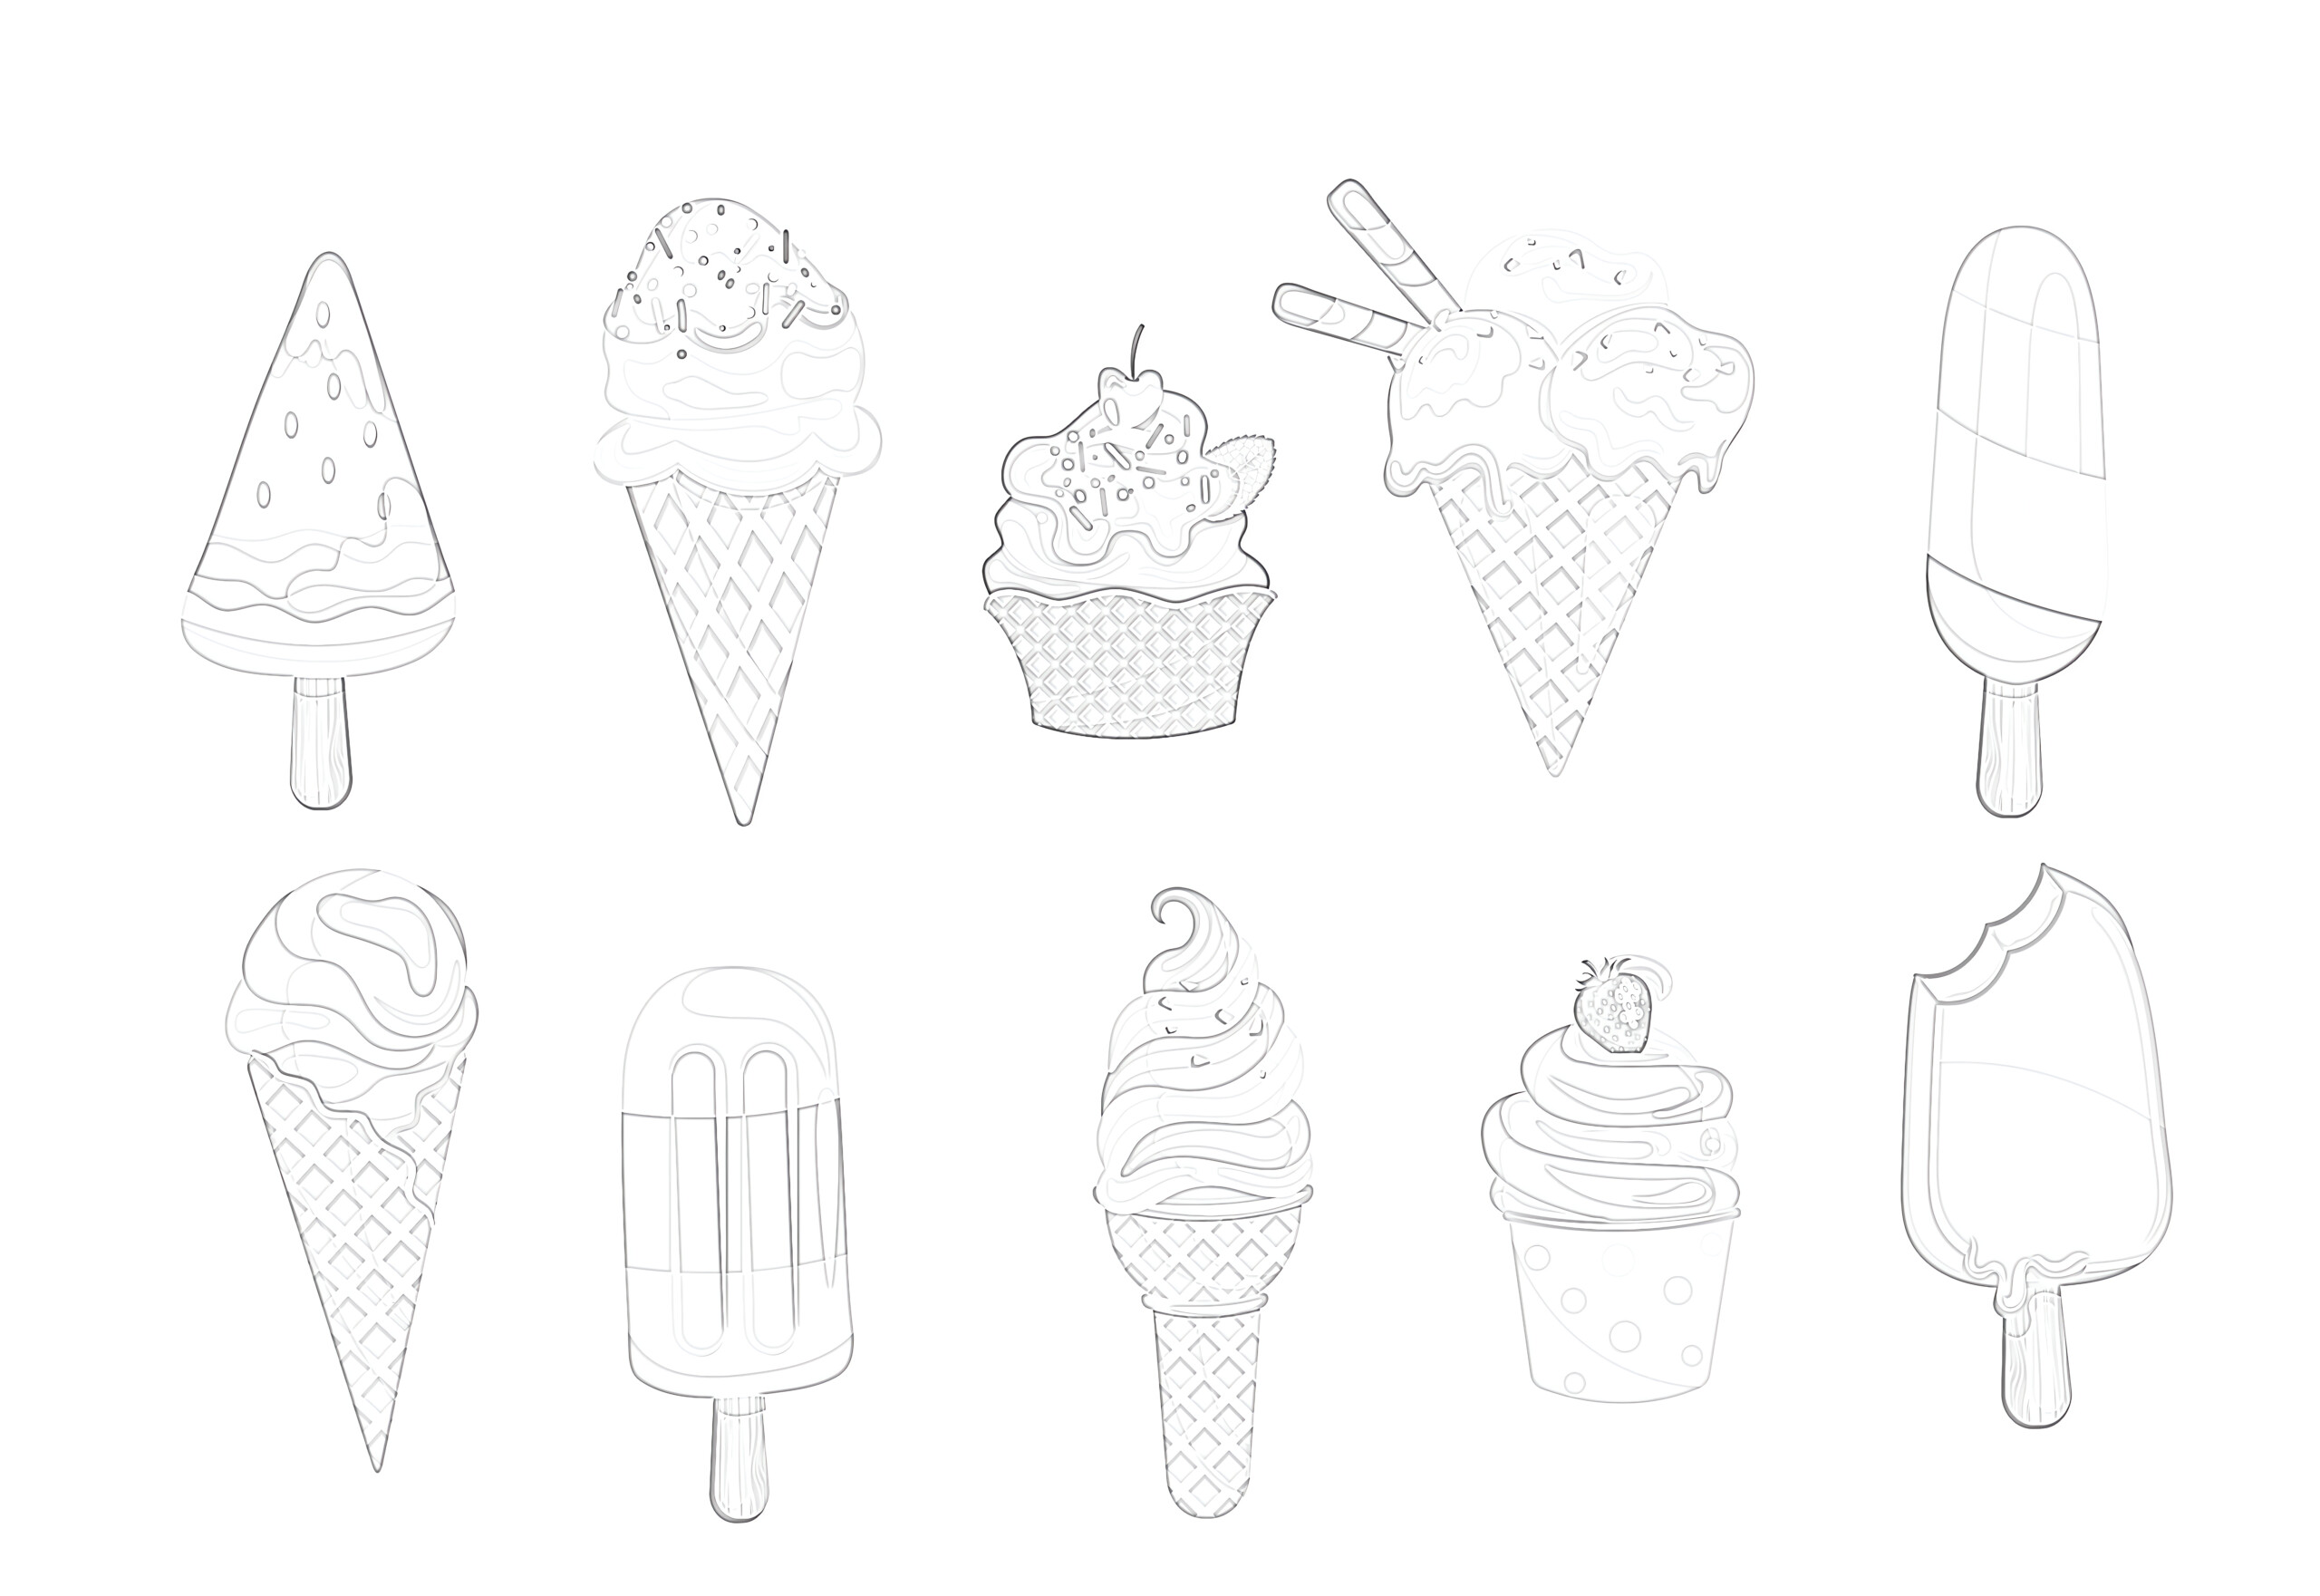 Ice Cream Collection - Coloring page